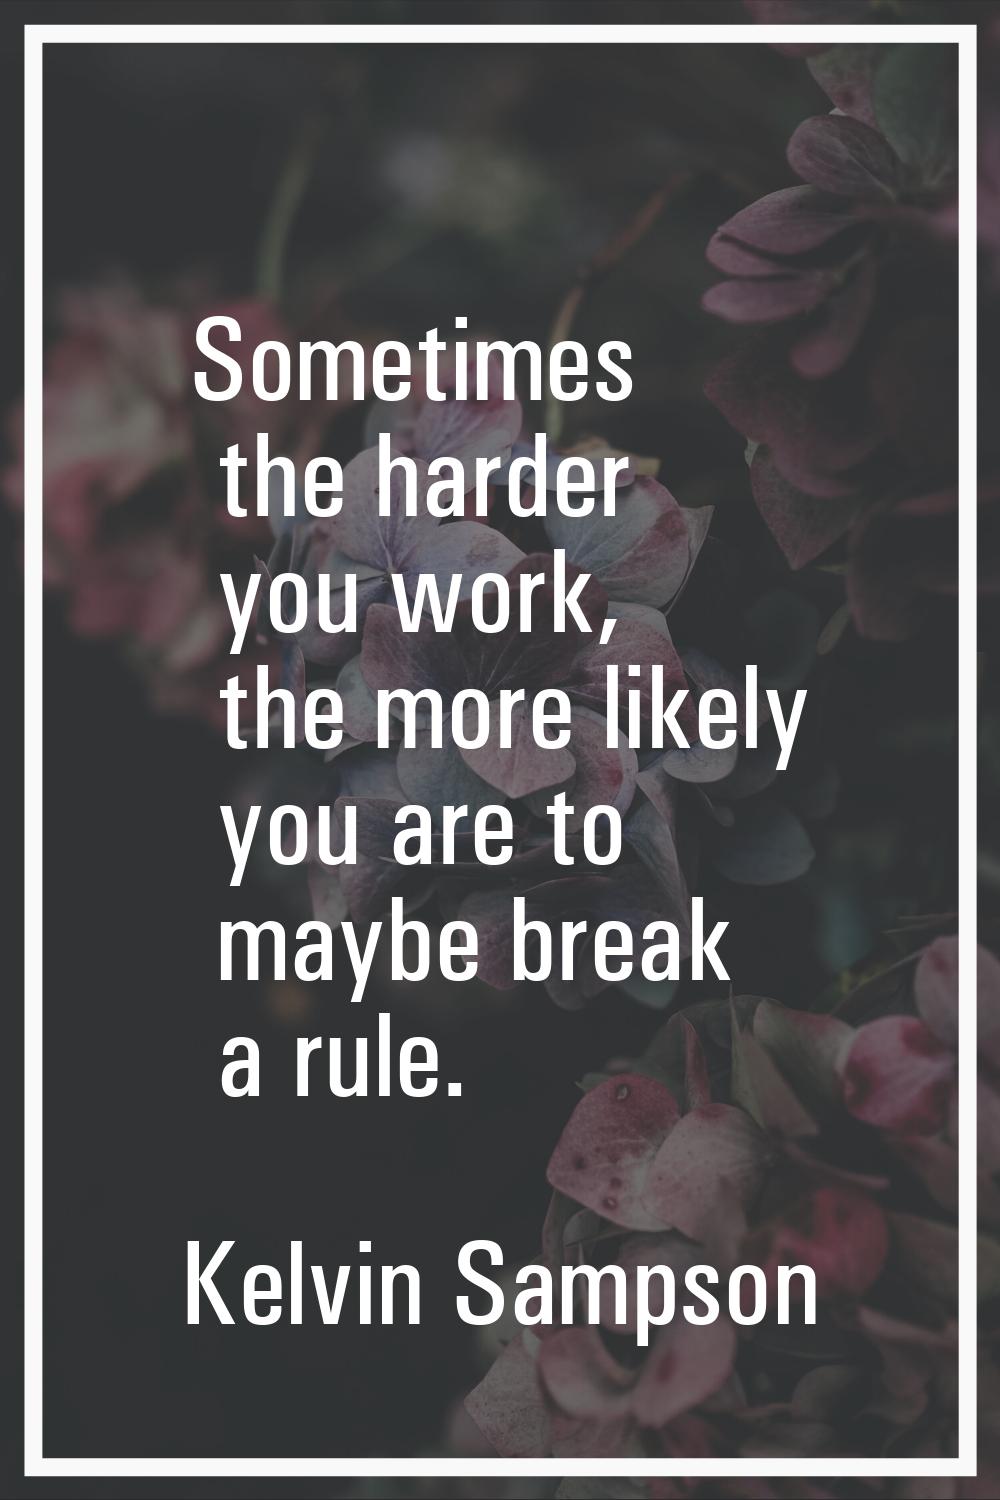 Sometimes the harder you work, the more likely you are to maybe break a rule.